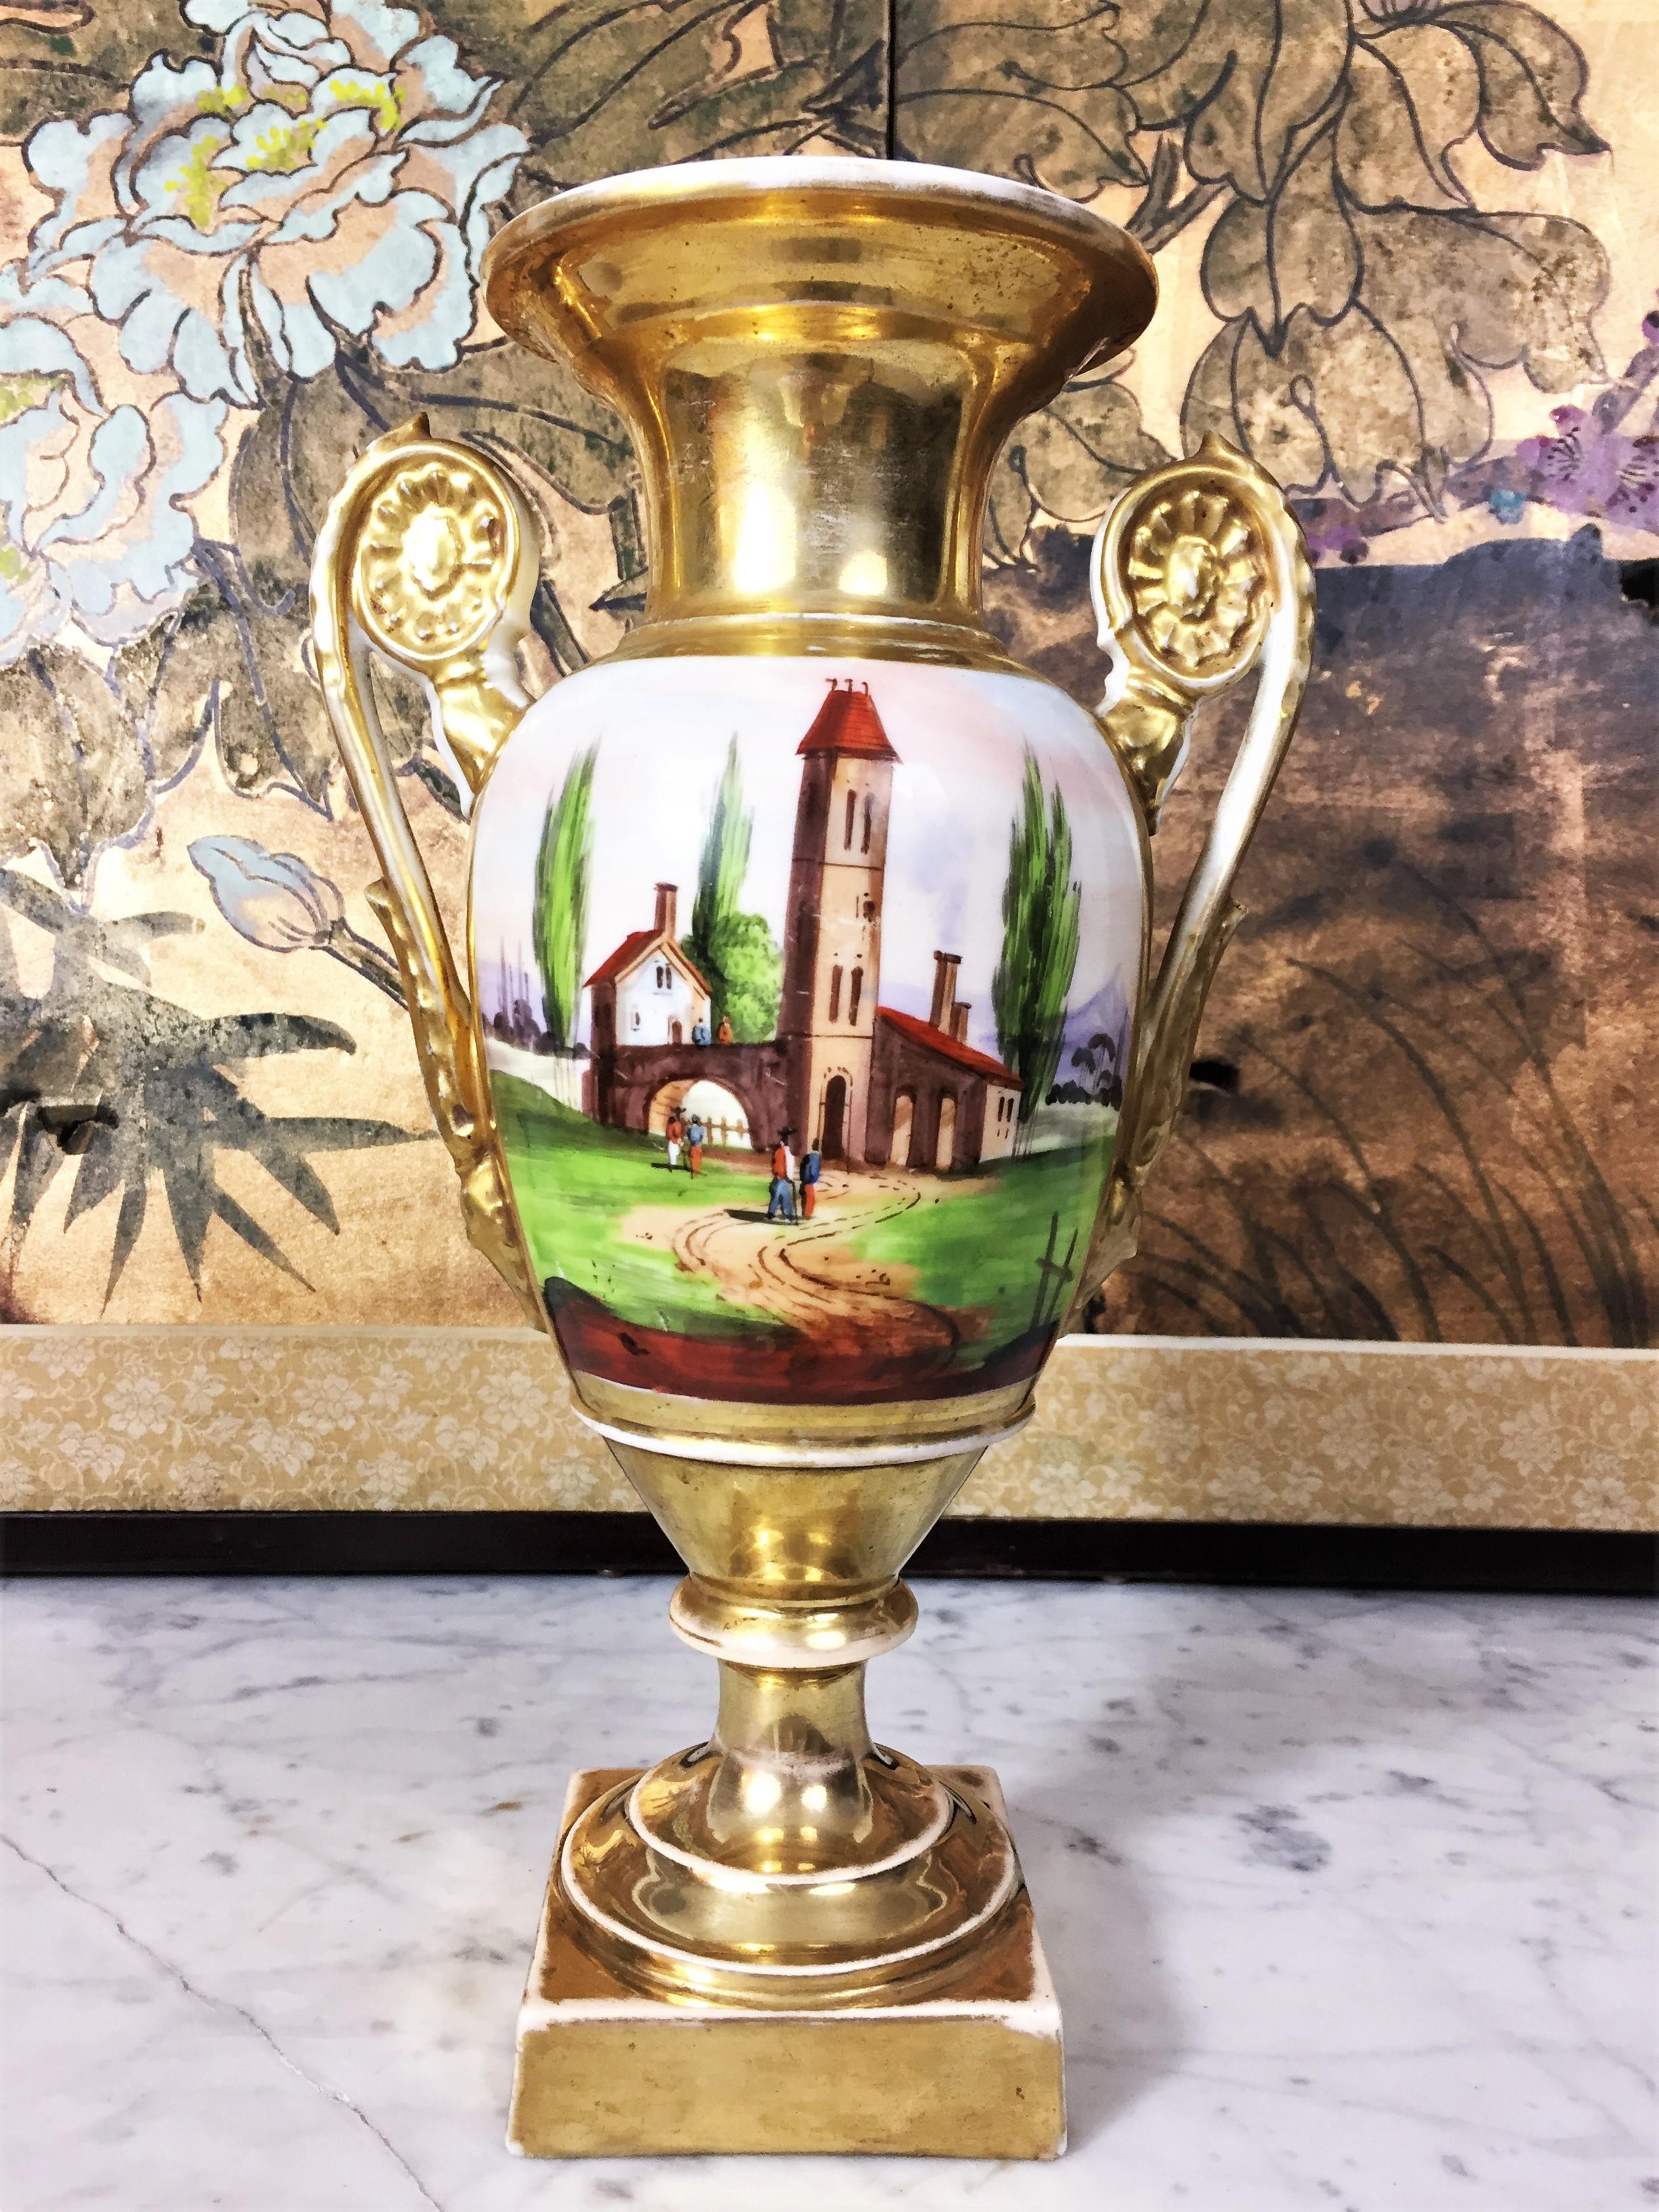 Elegant baluster Paris porcelain vase painted and gilded by hand. The two sides represent a different decoration, on one side a scene of a gentleman conversing with a woman leaning on the edge of a window and on the other an animated